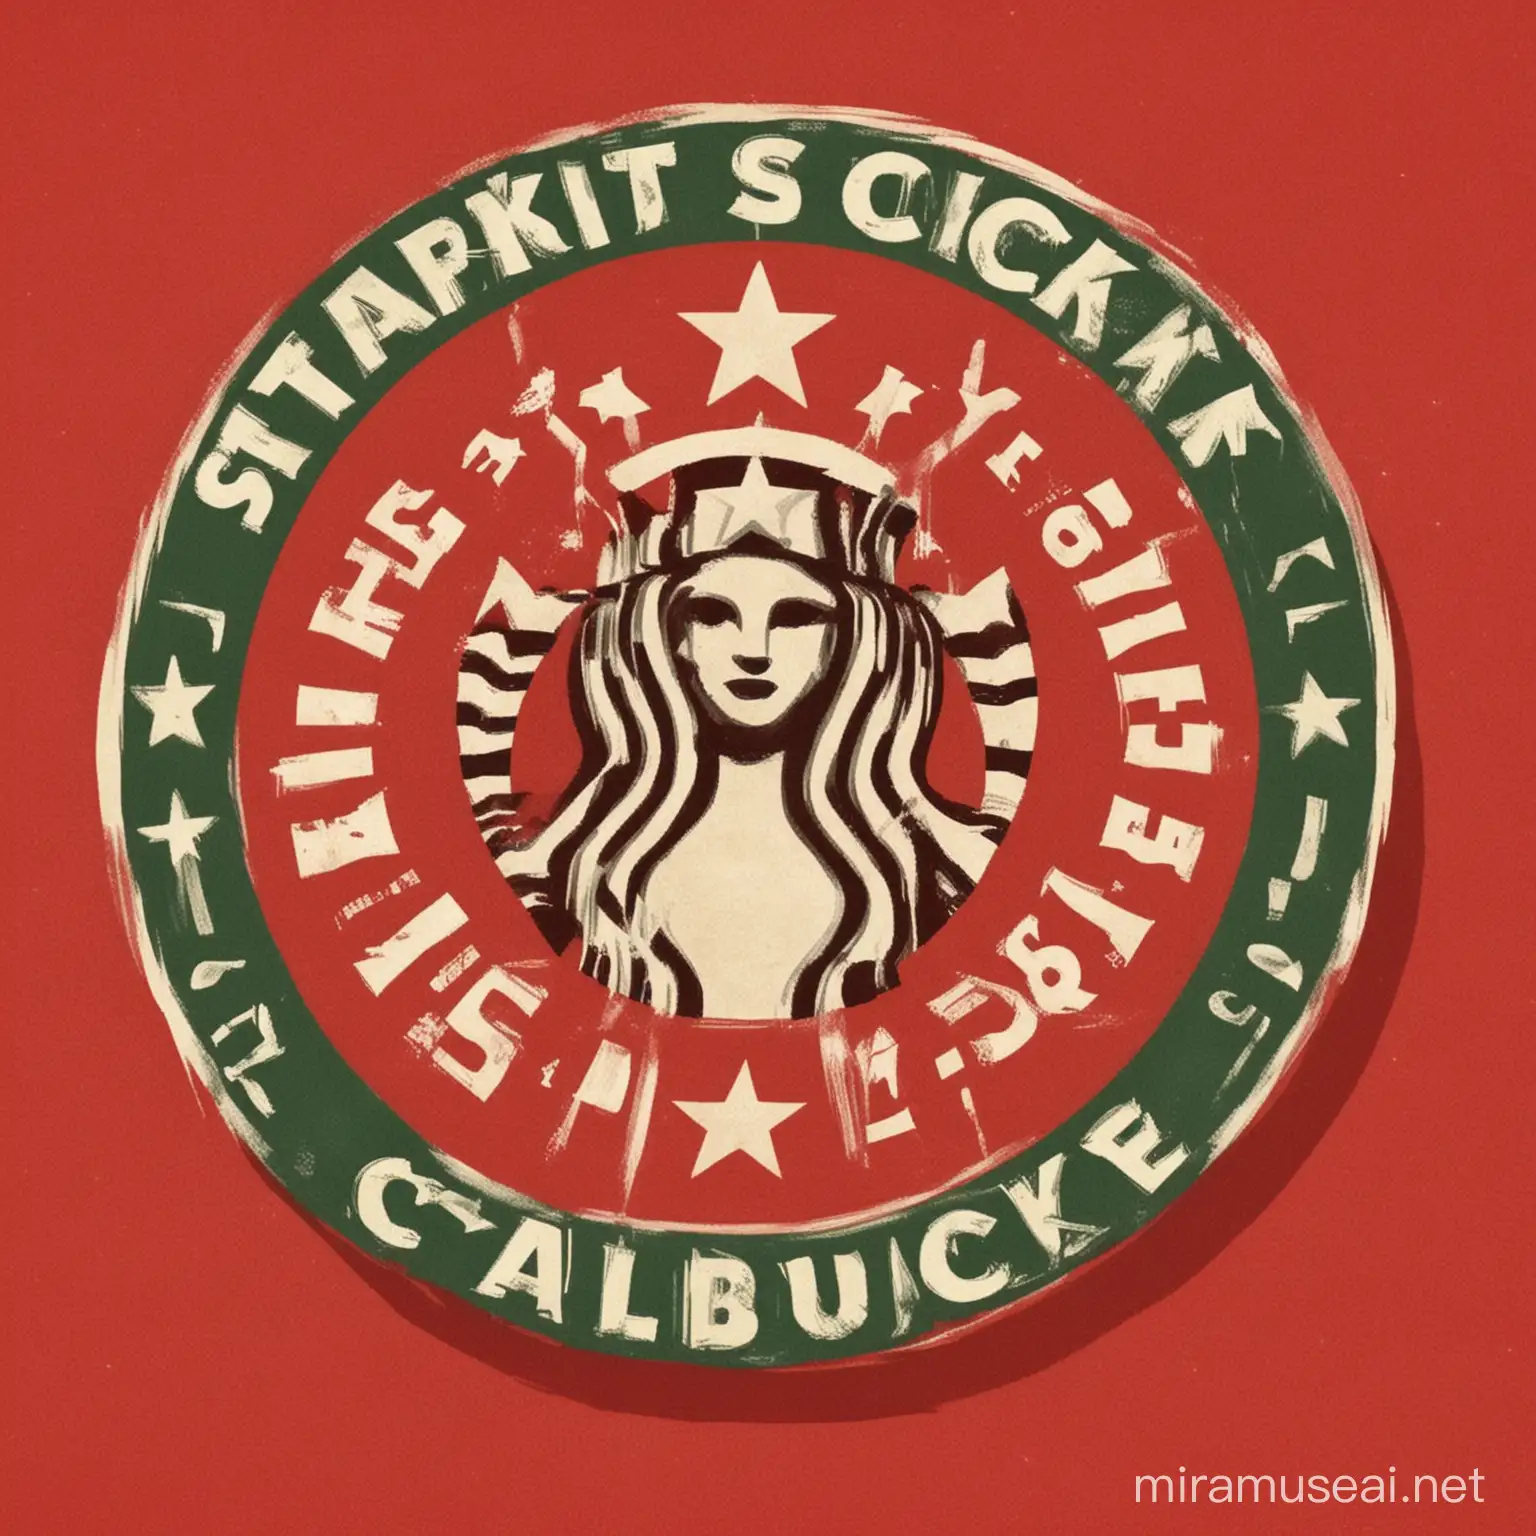 can you create a communist version of the Starbucks logo please ? 
